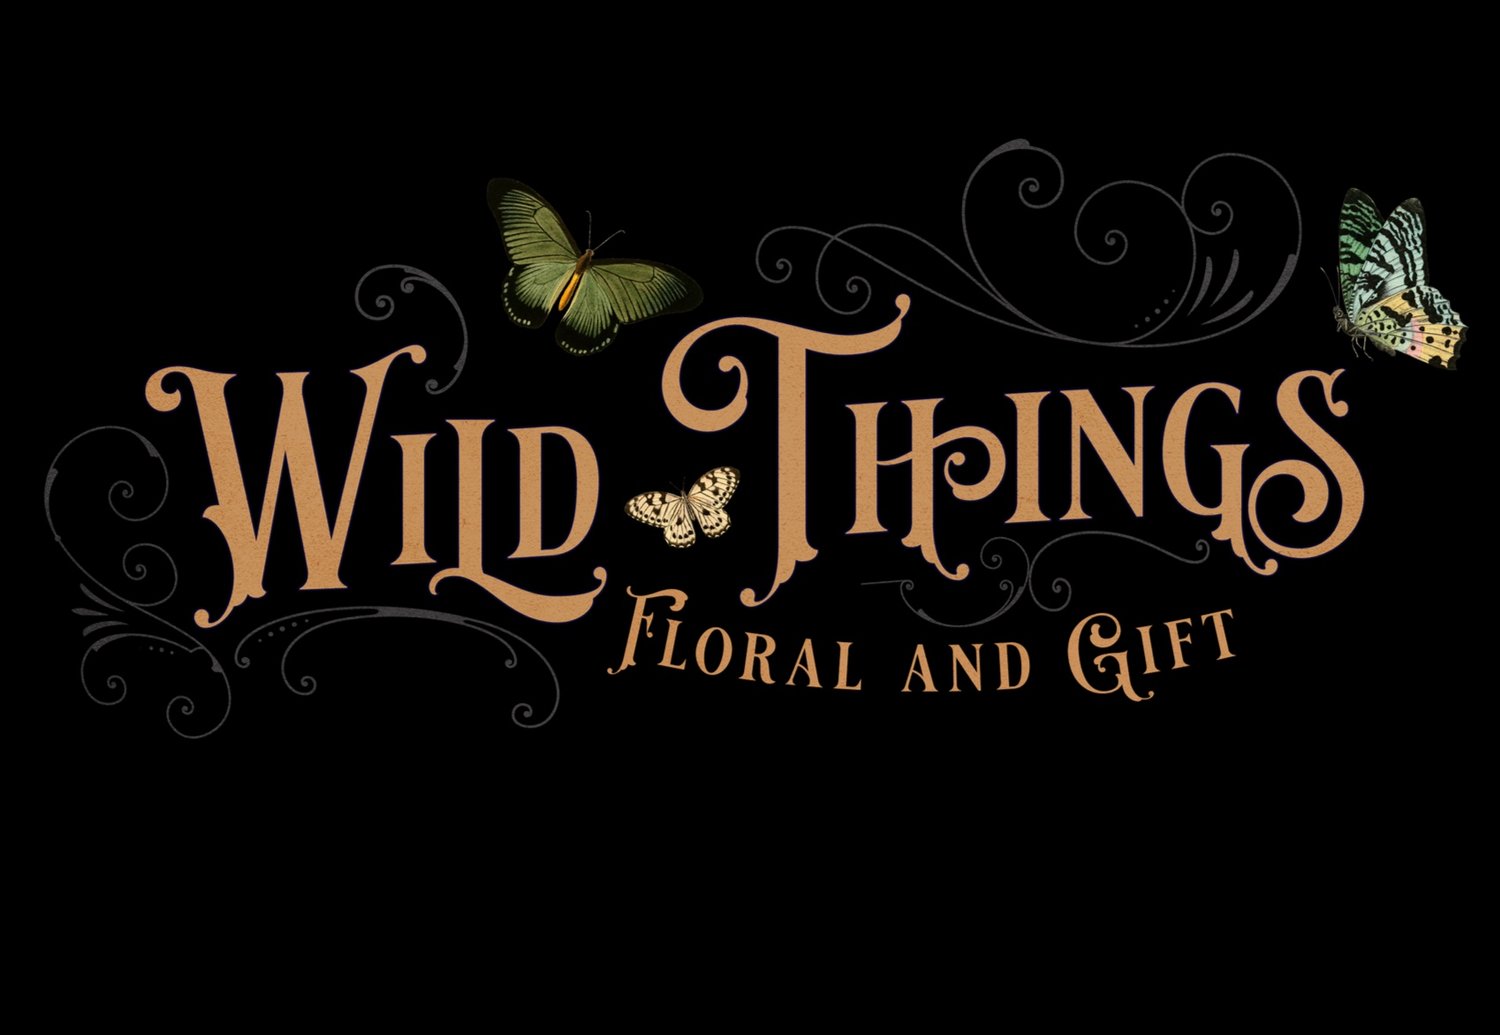 WILD THINGS Floral and Gift